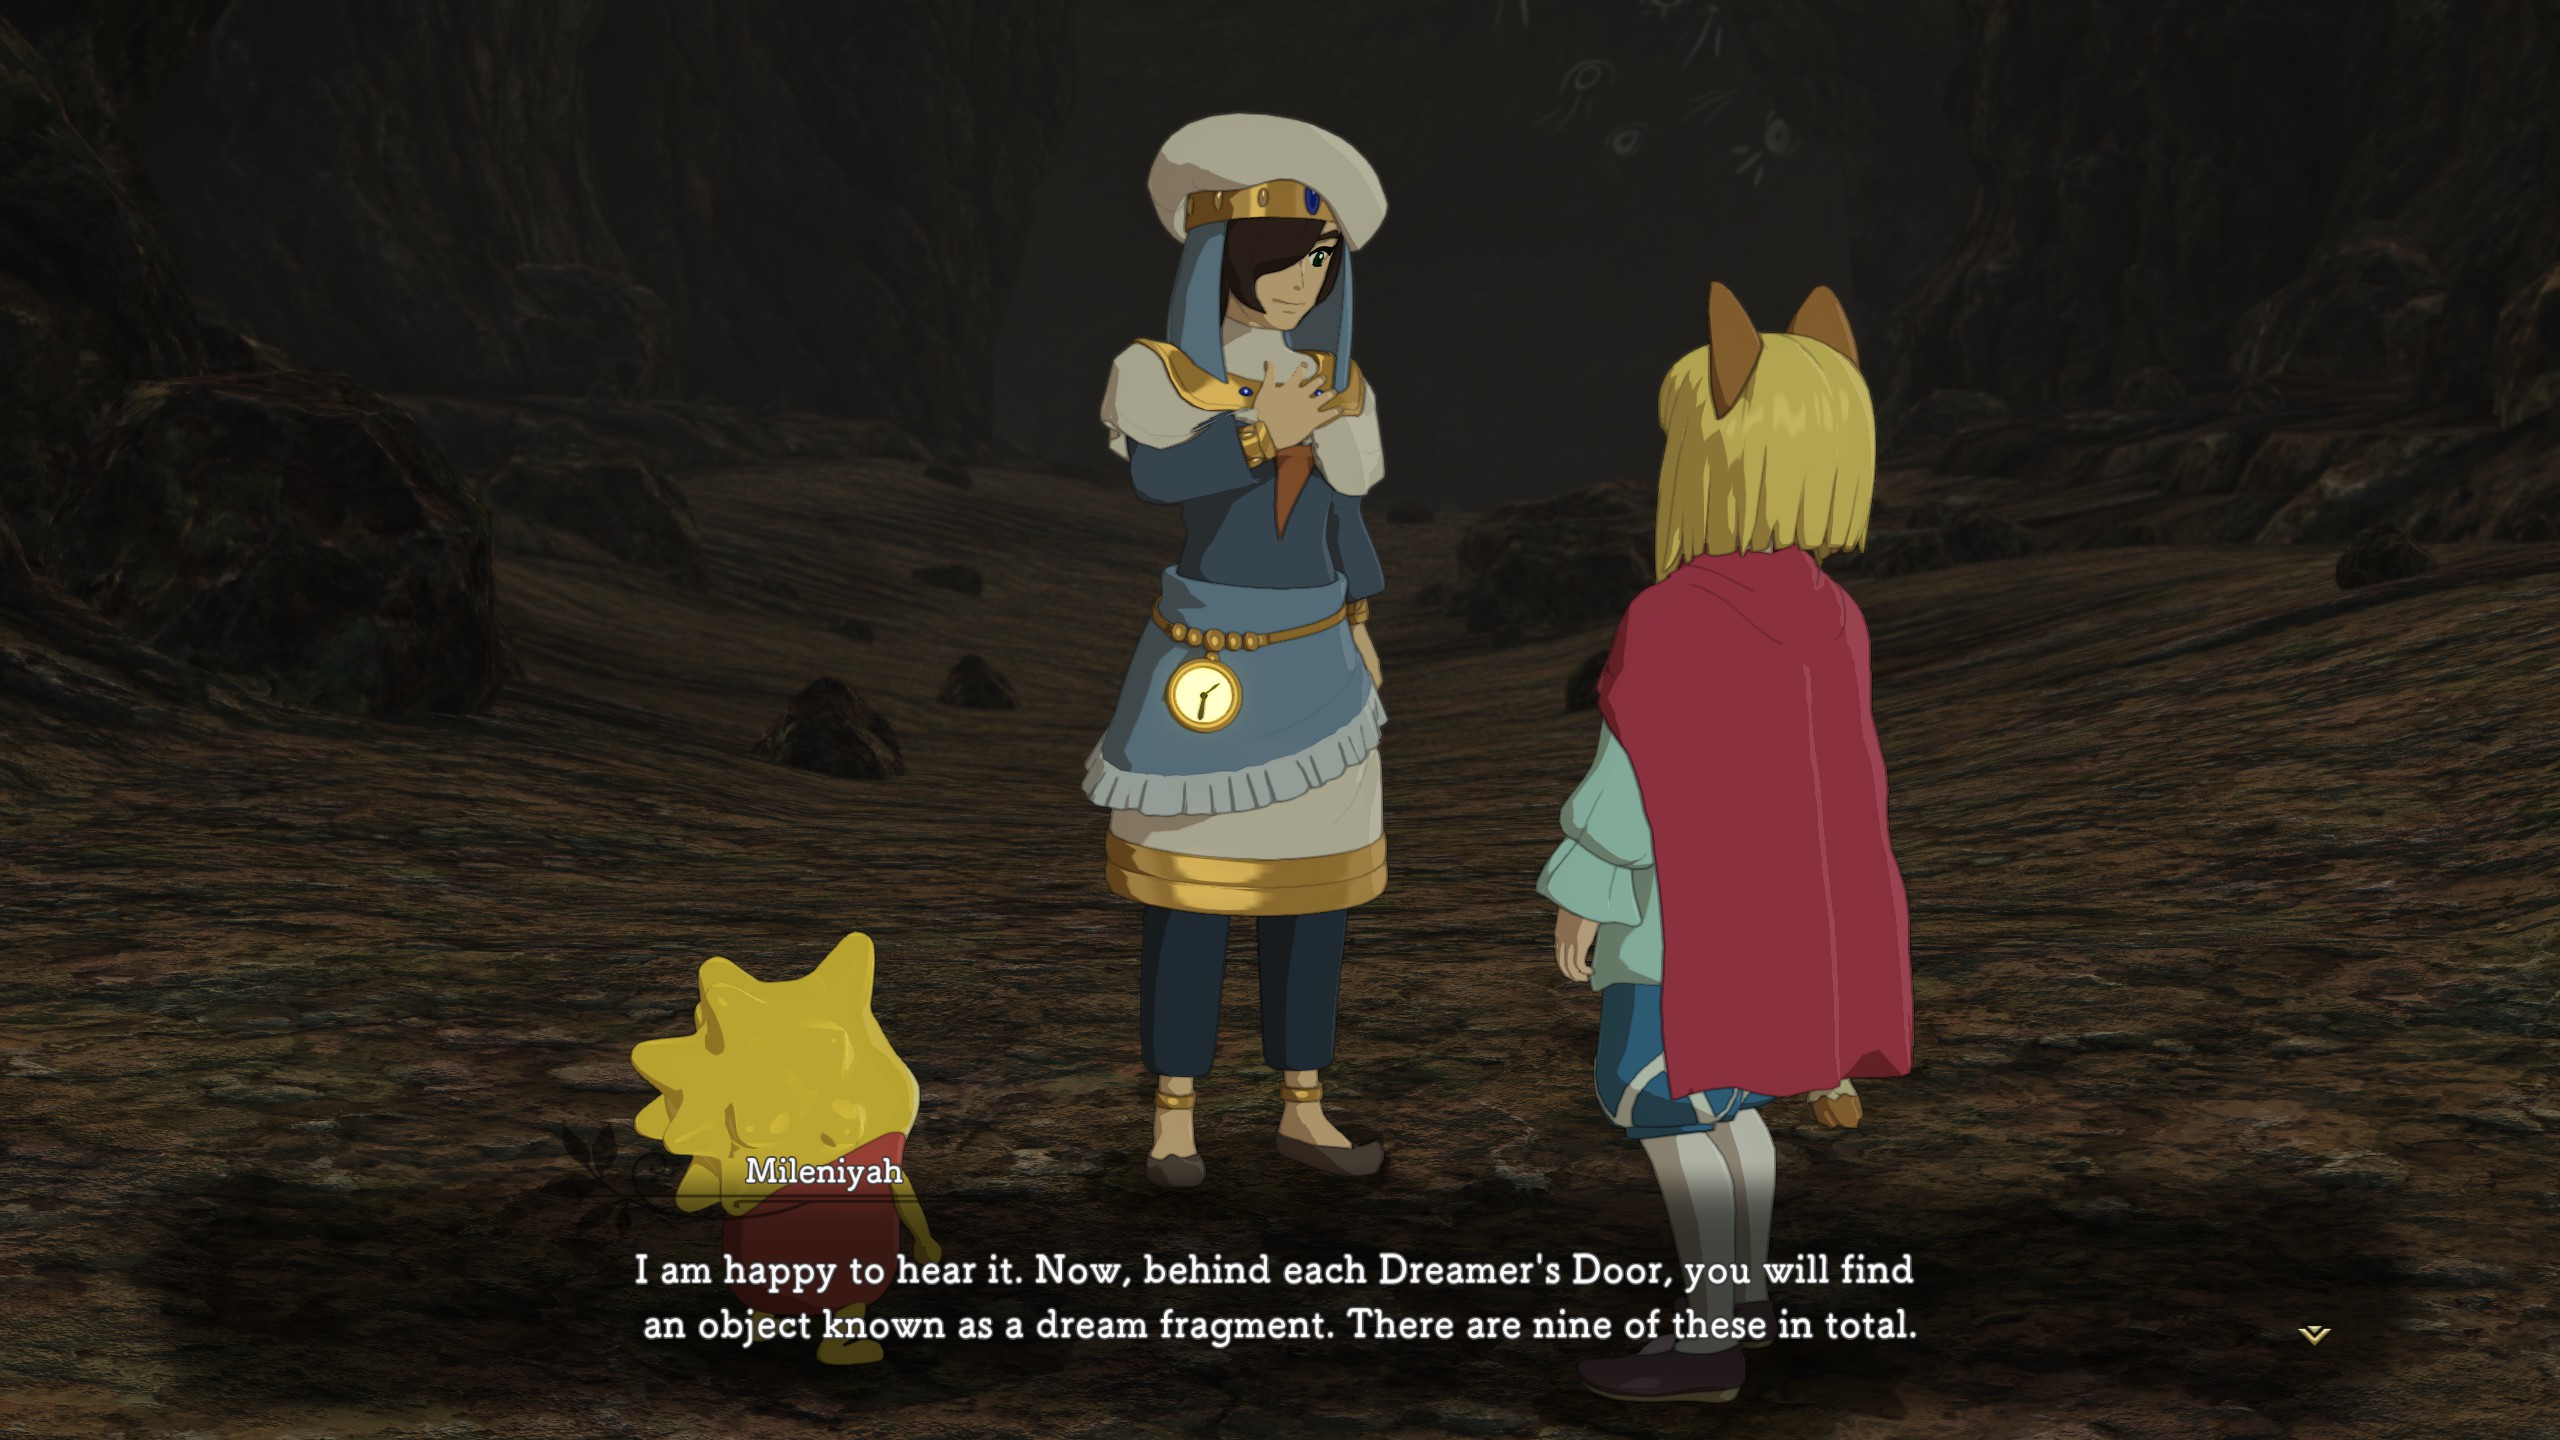 Ni no Kuni 2 Guide – The secrets of the 9 Dreamer’s Door exposed